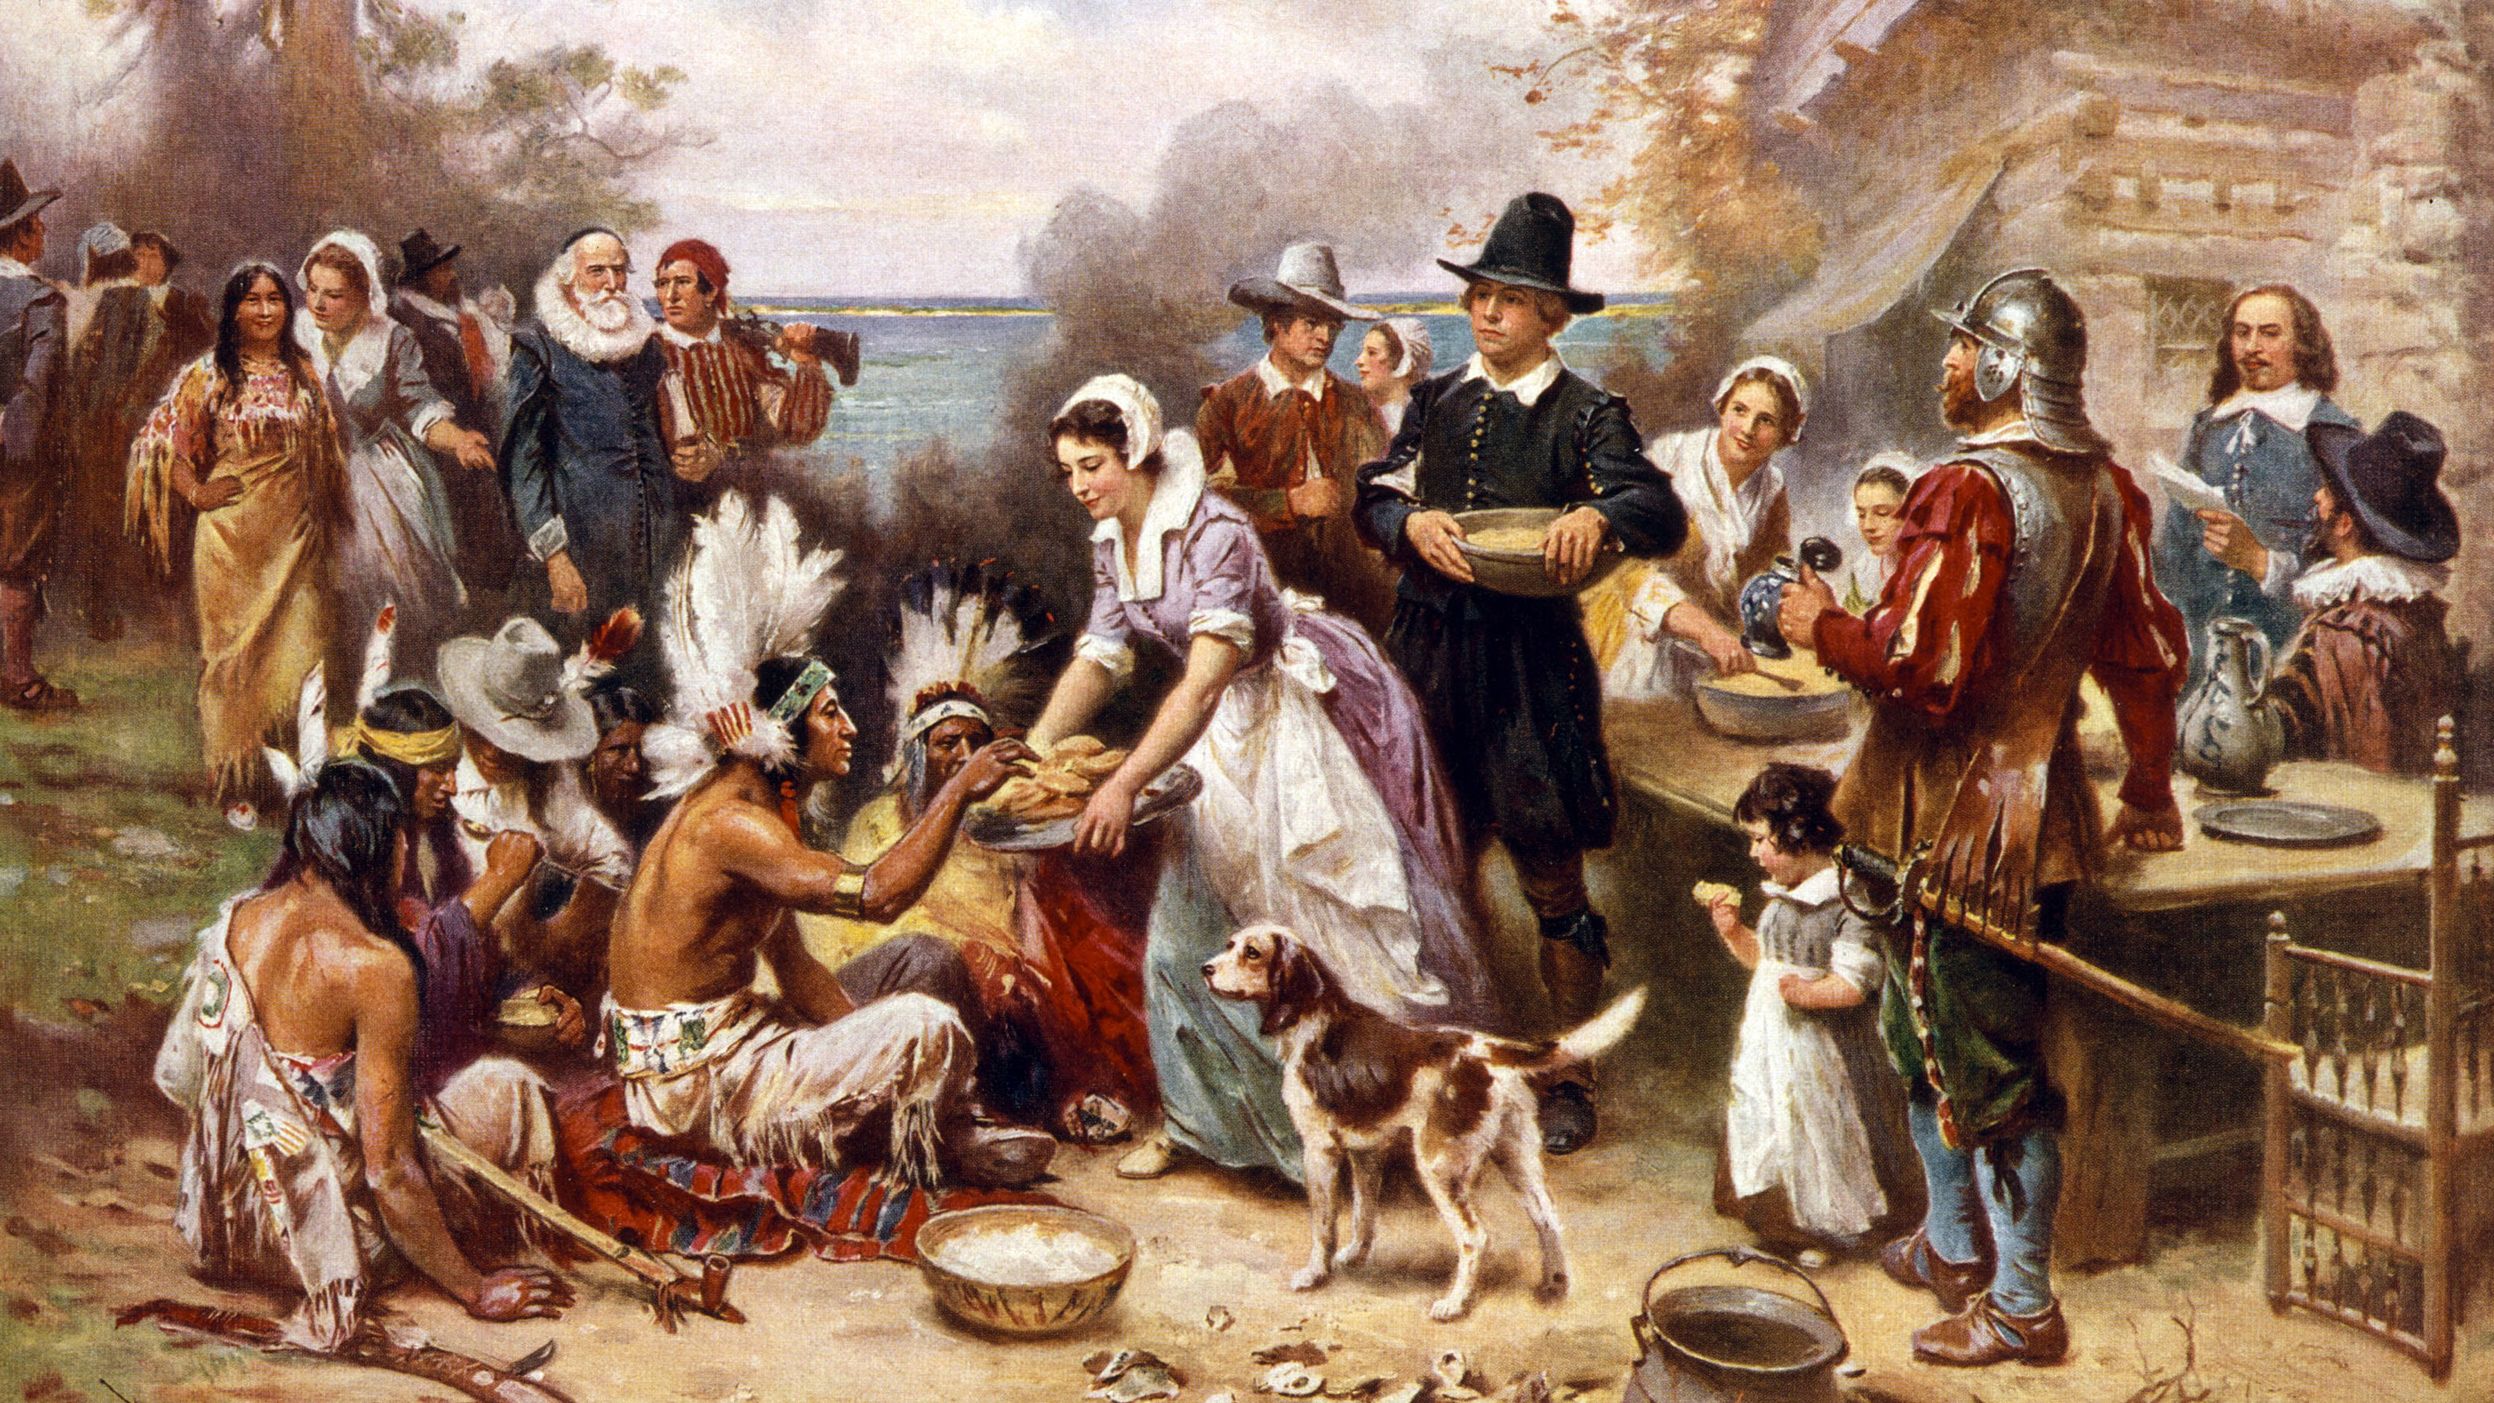 A painting representing a vision of the first Thanksgiving 1621. 